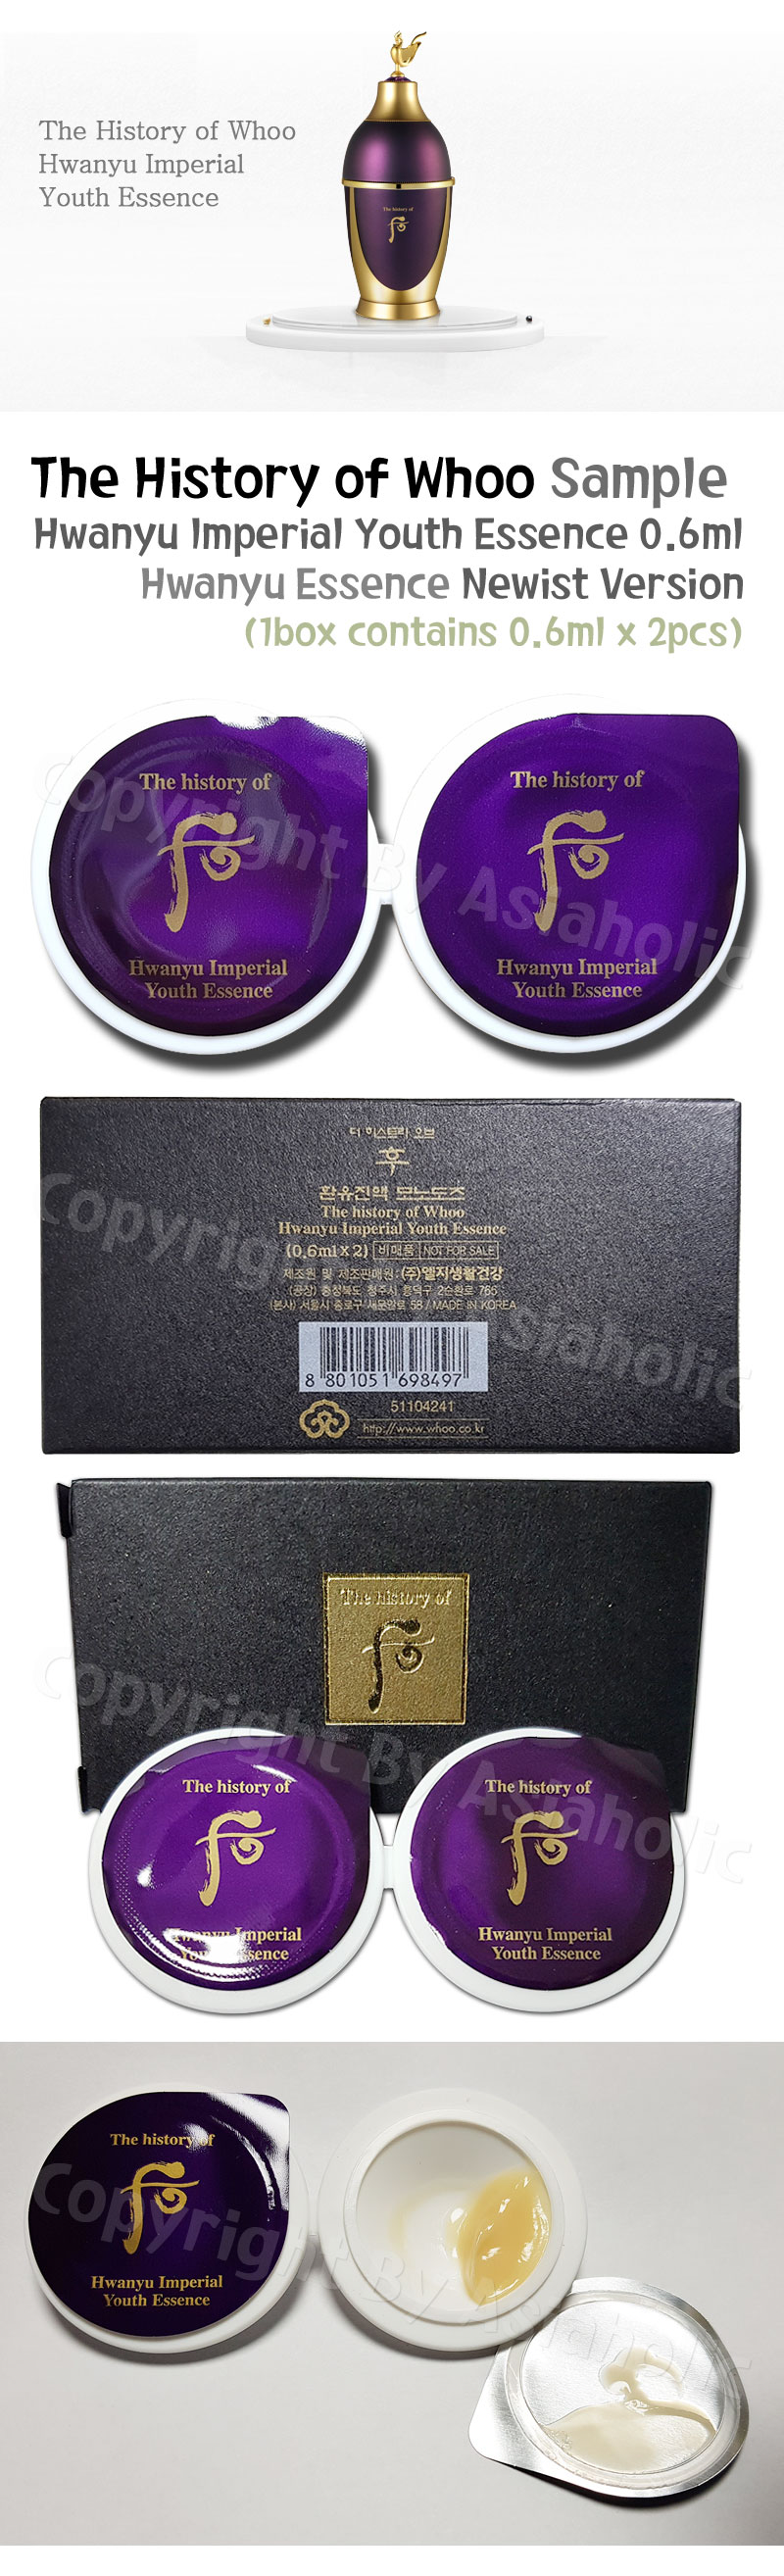 The history of Whoo Hwanyu Imperial Youth Essence 0.6ml x 10pcs (5Box) Newest Version